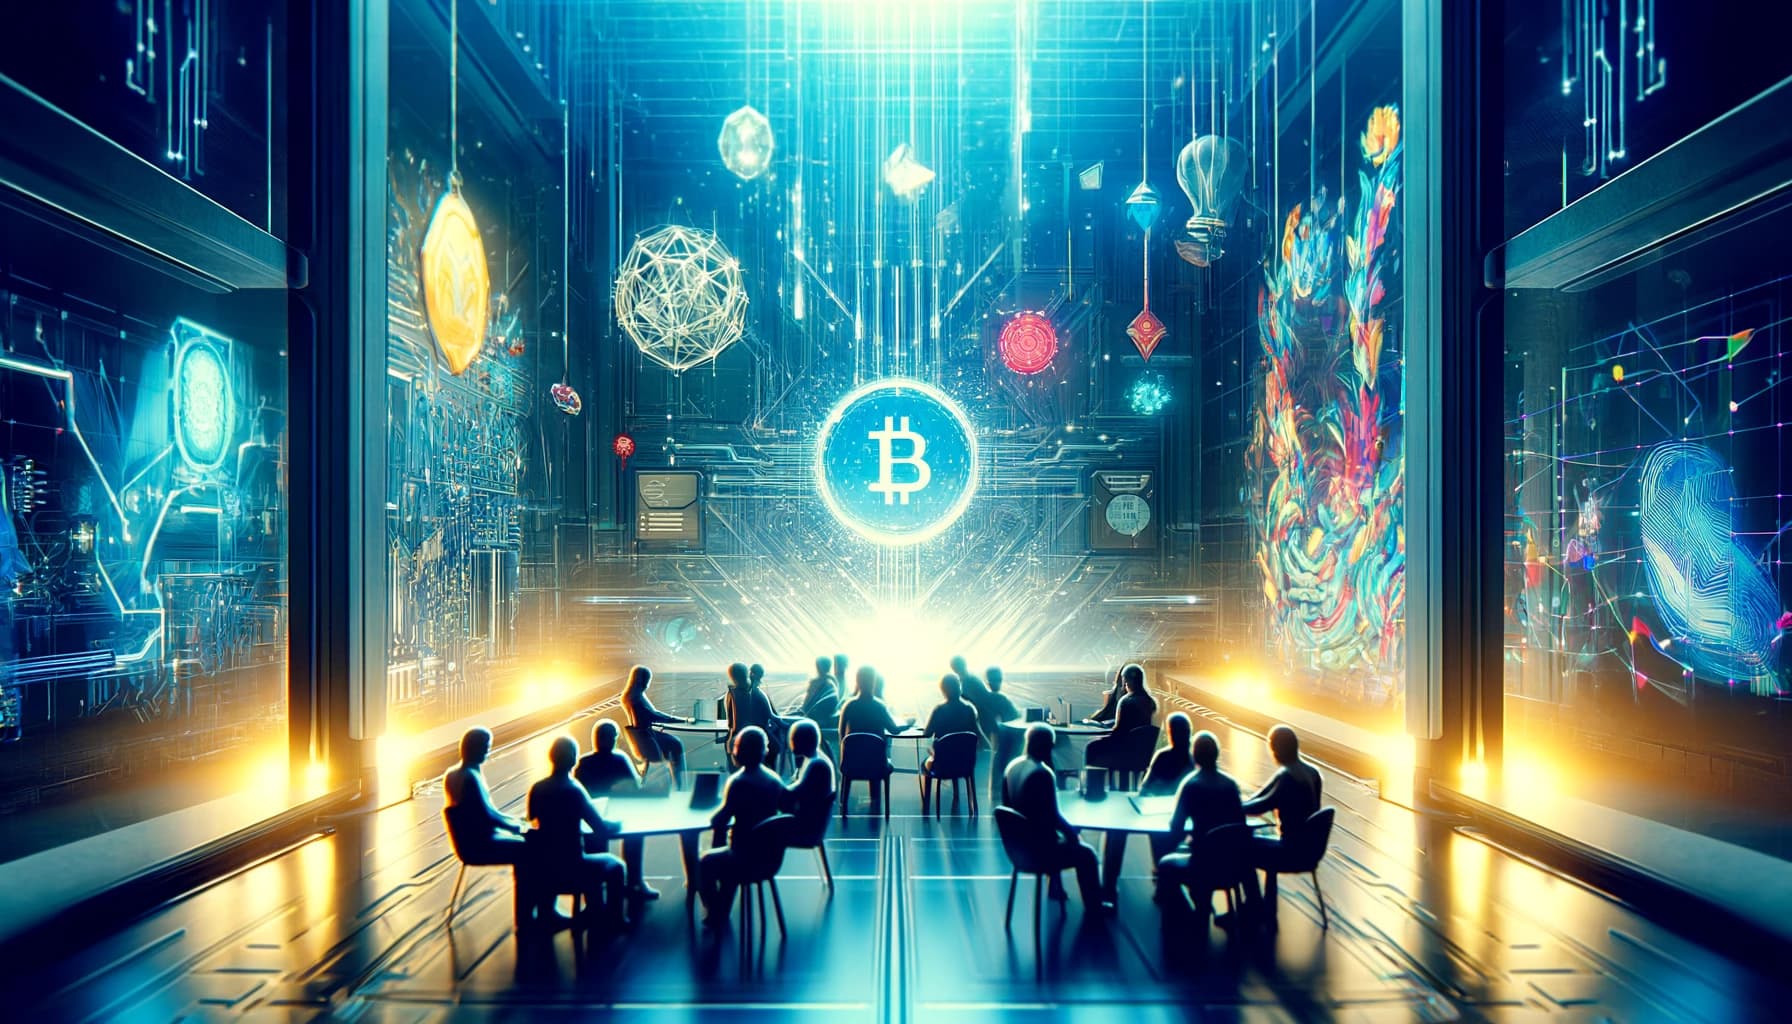 People sitting at separate round tables in a conference room surrounded by bitcoin logos on the walls.